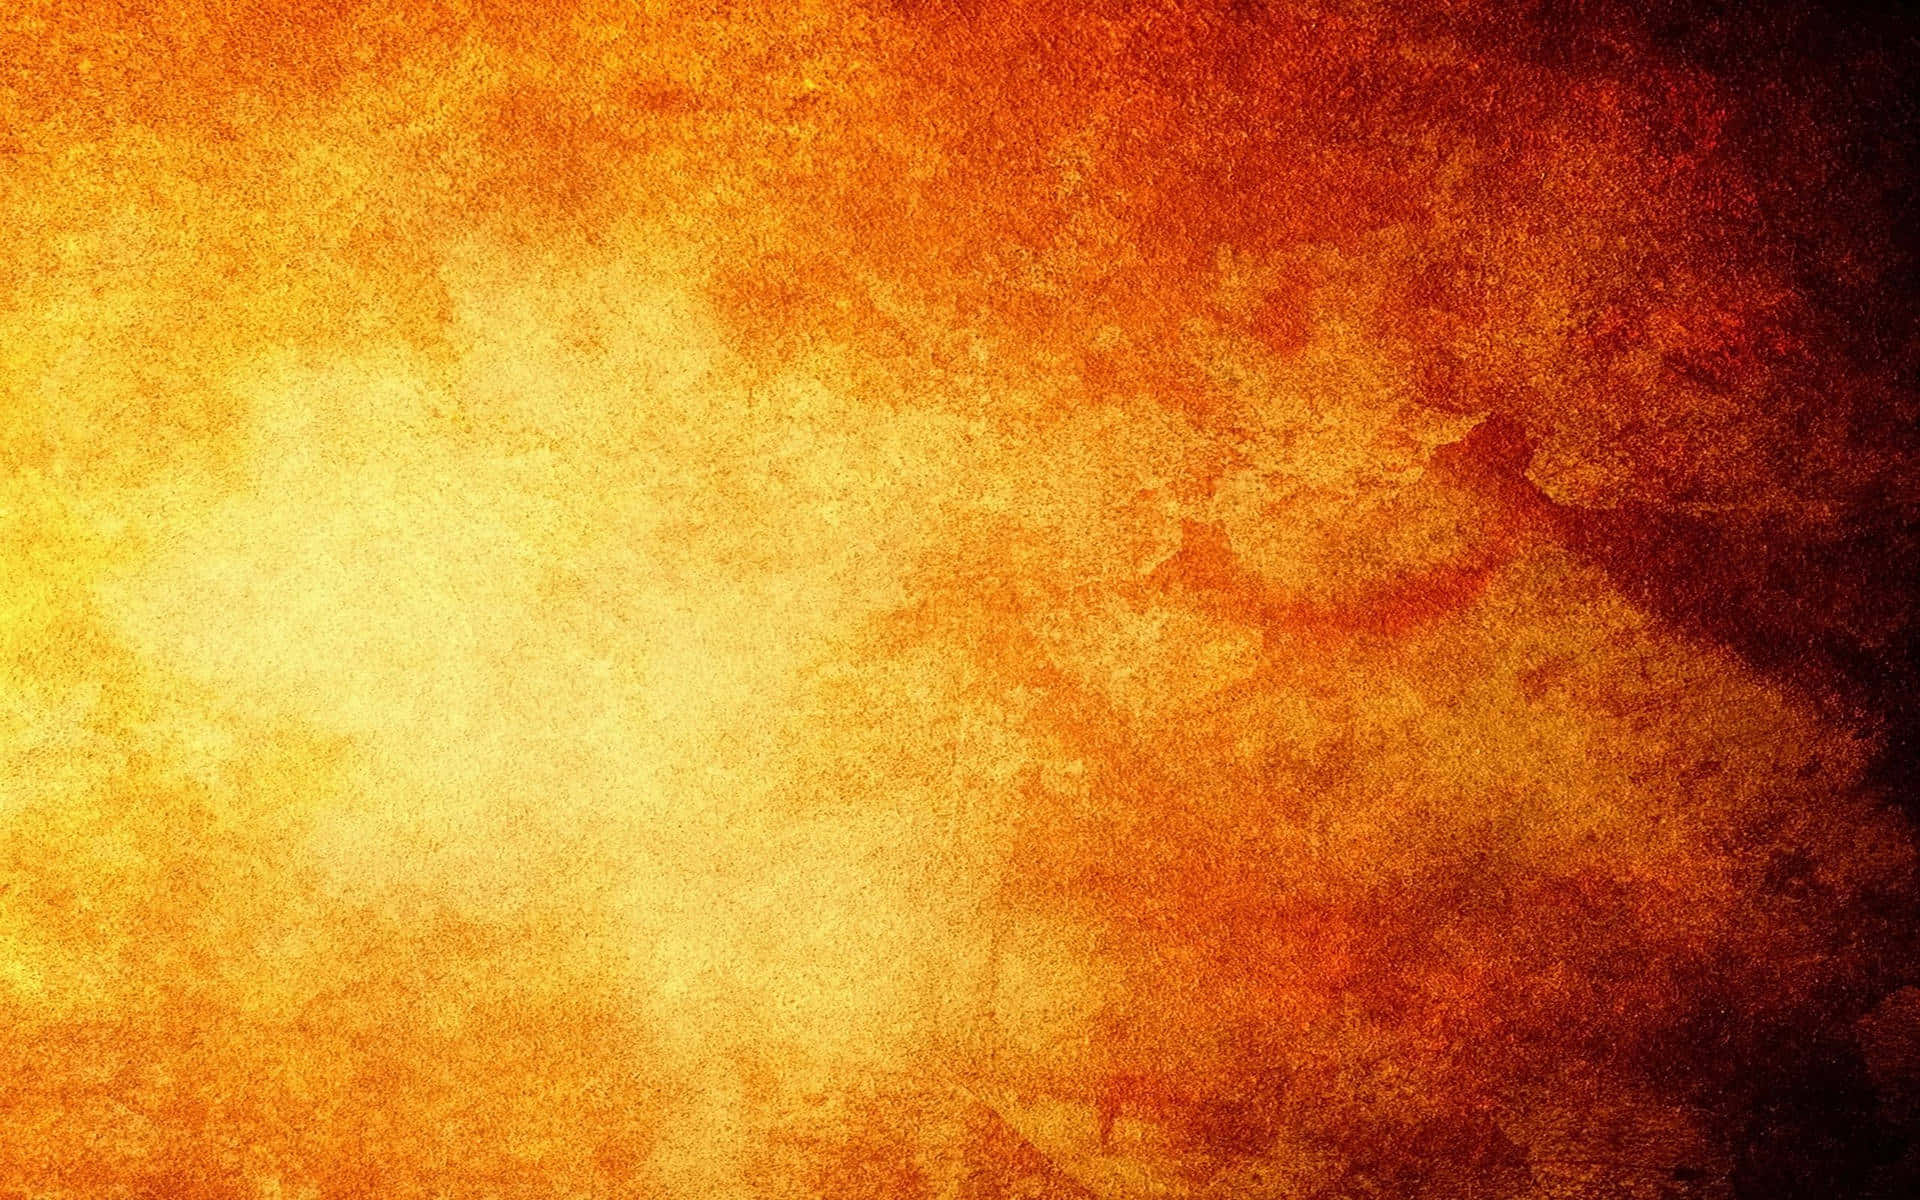 A Grungy Orange Background With A Yellow Glow